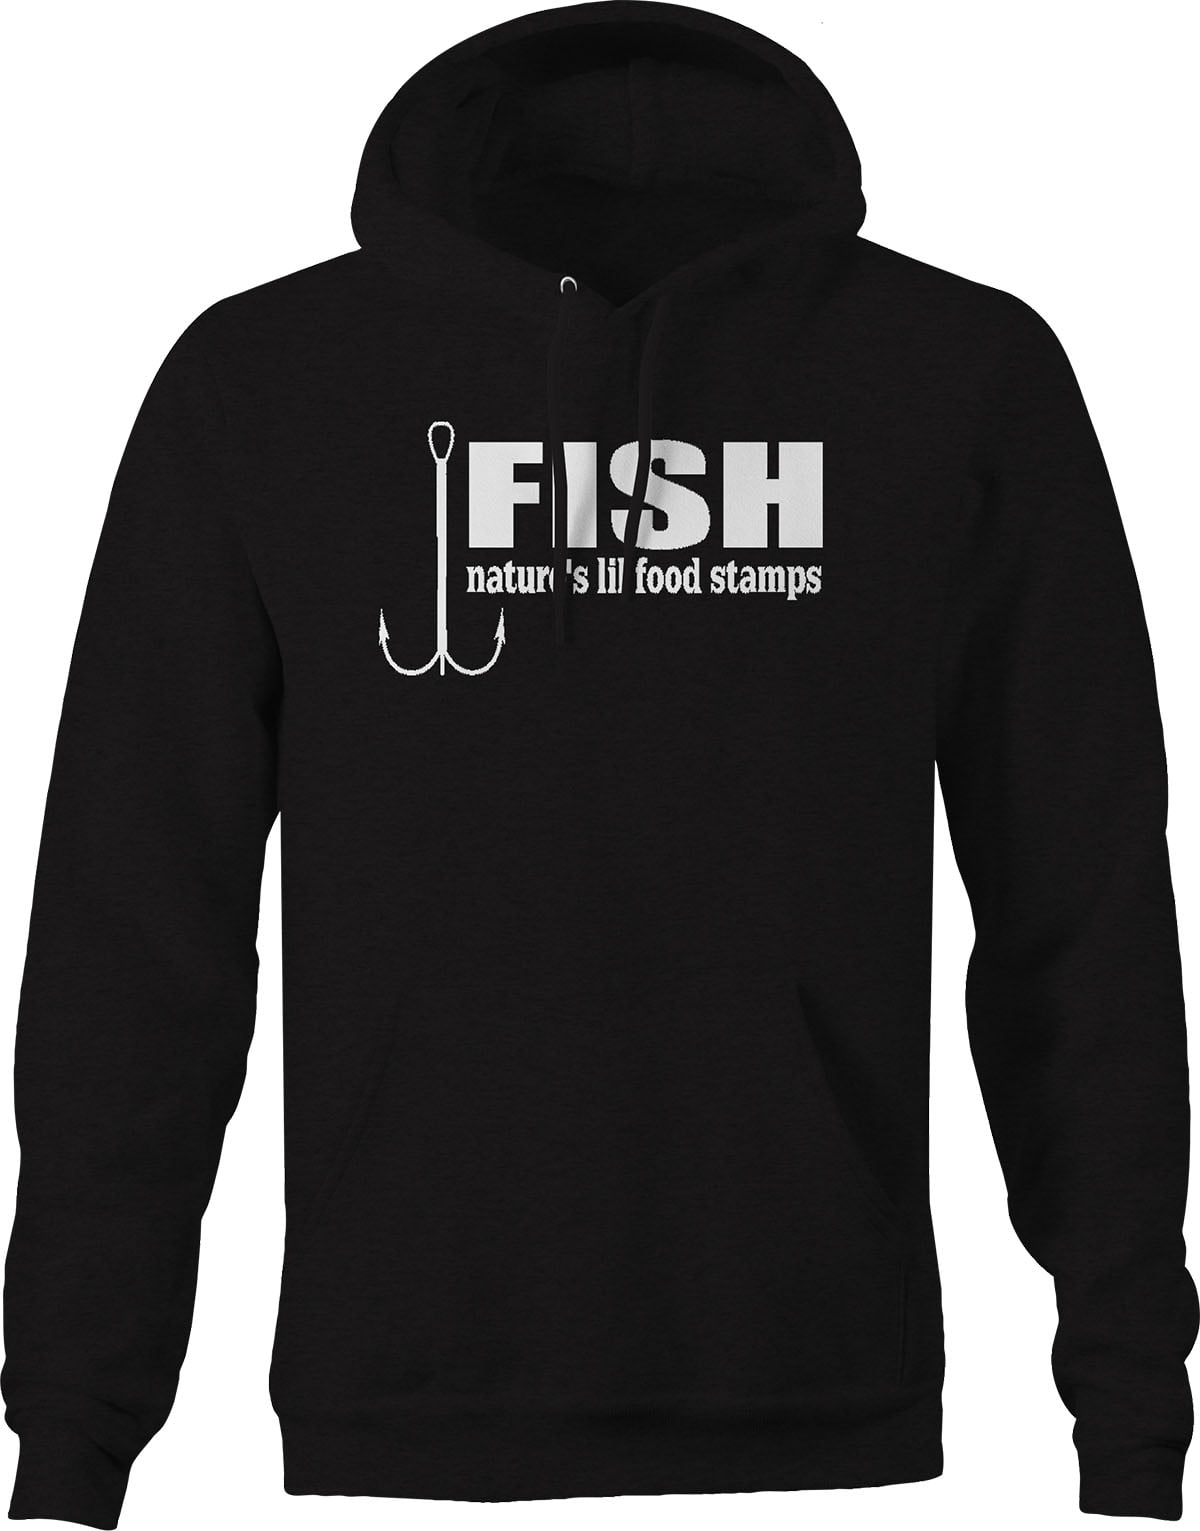 Fish Natures Lil Food Stamps Government Funny Hoodies for Men Large Black 